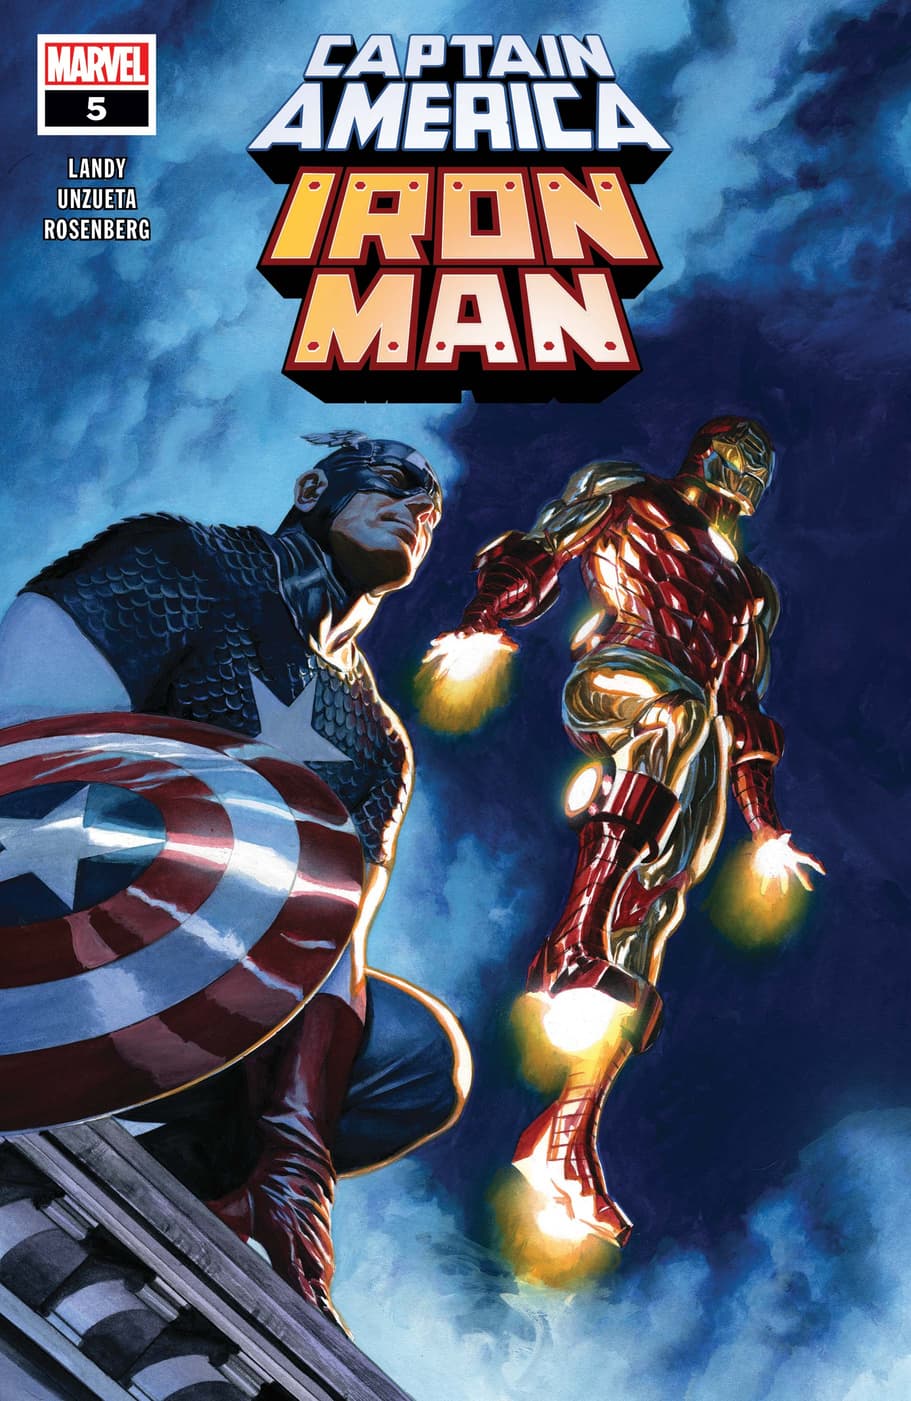 Captain America/Iron Man #5 cover by Alex Ross